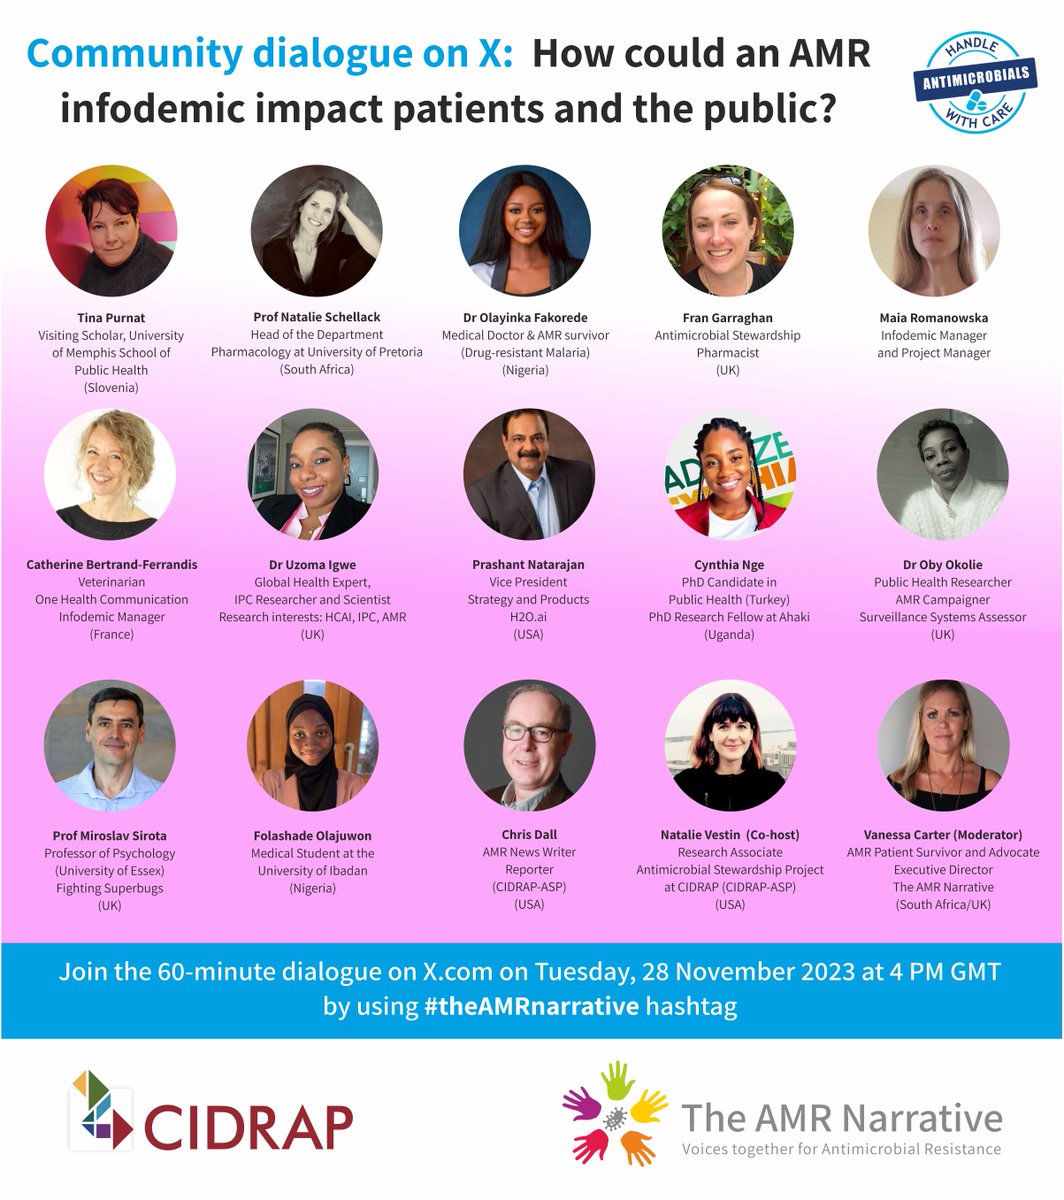 HAPPENING TOMORROW, 28 NOV, 4 PM GMT: How could an AMR infodemic impact patients and the public? Everyone welcome! To join, search for and use the hashtag #theAMRnarrative on X Read more here: amrnarrative.org/event/amr_info… #AntimicrobialResistance #infodemic